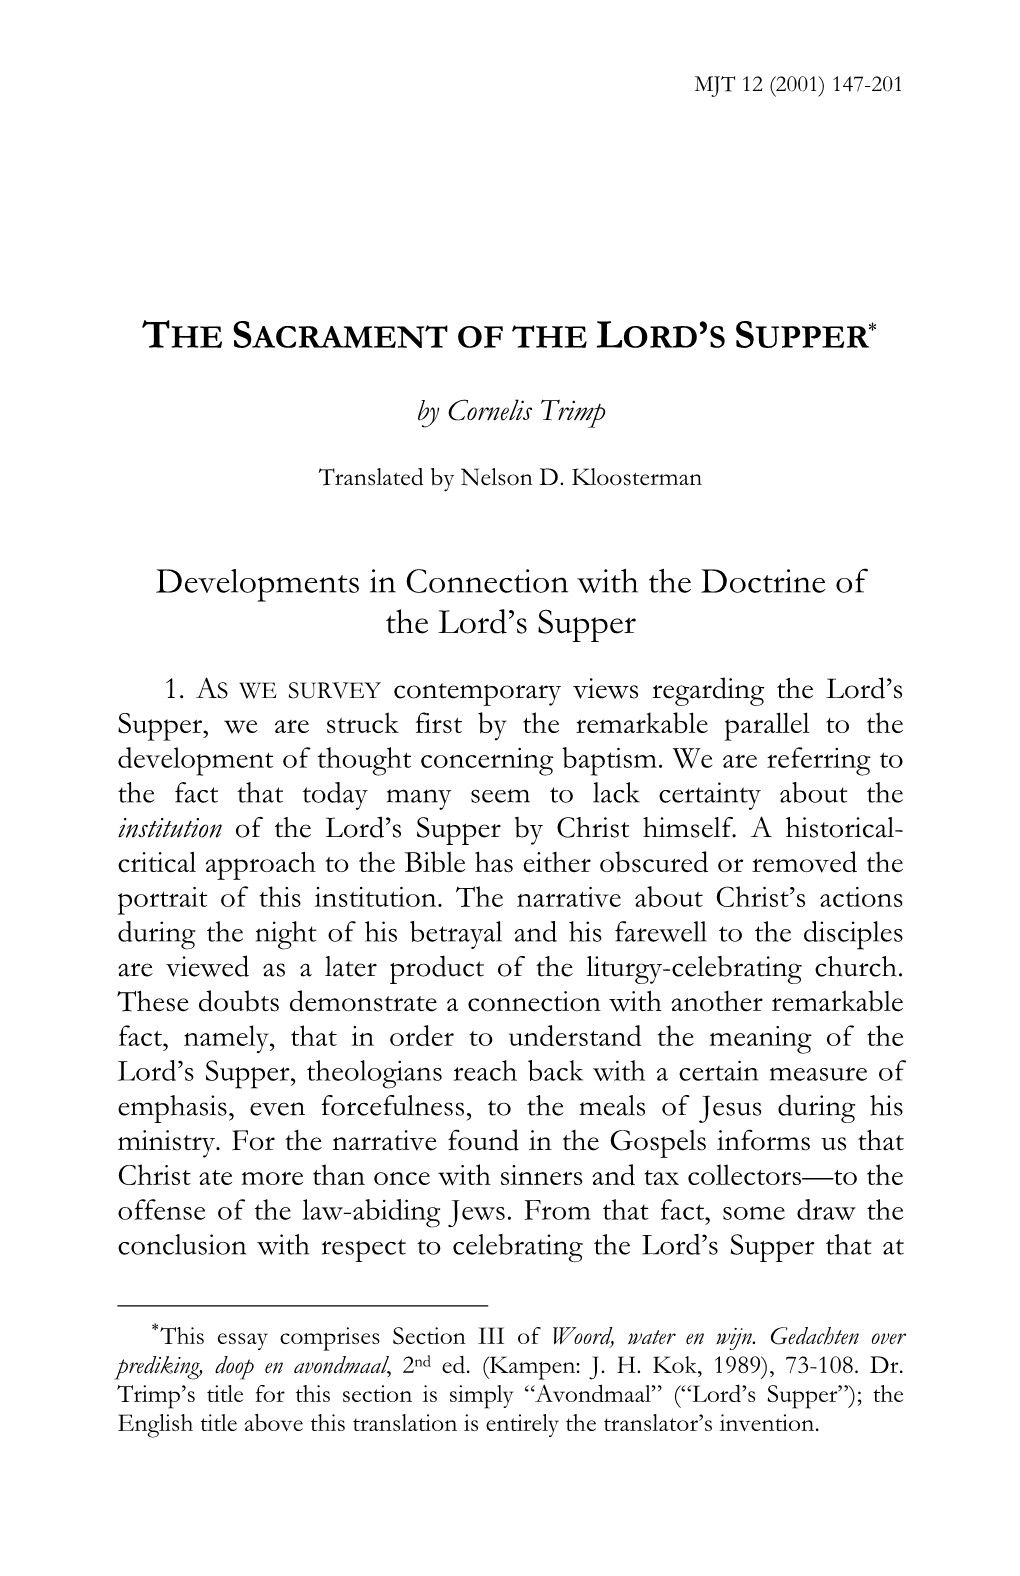 The Sacrament of the Lord's Supper